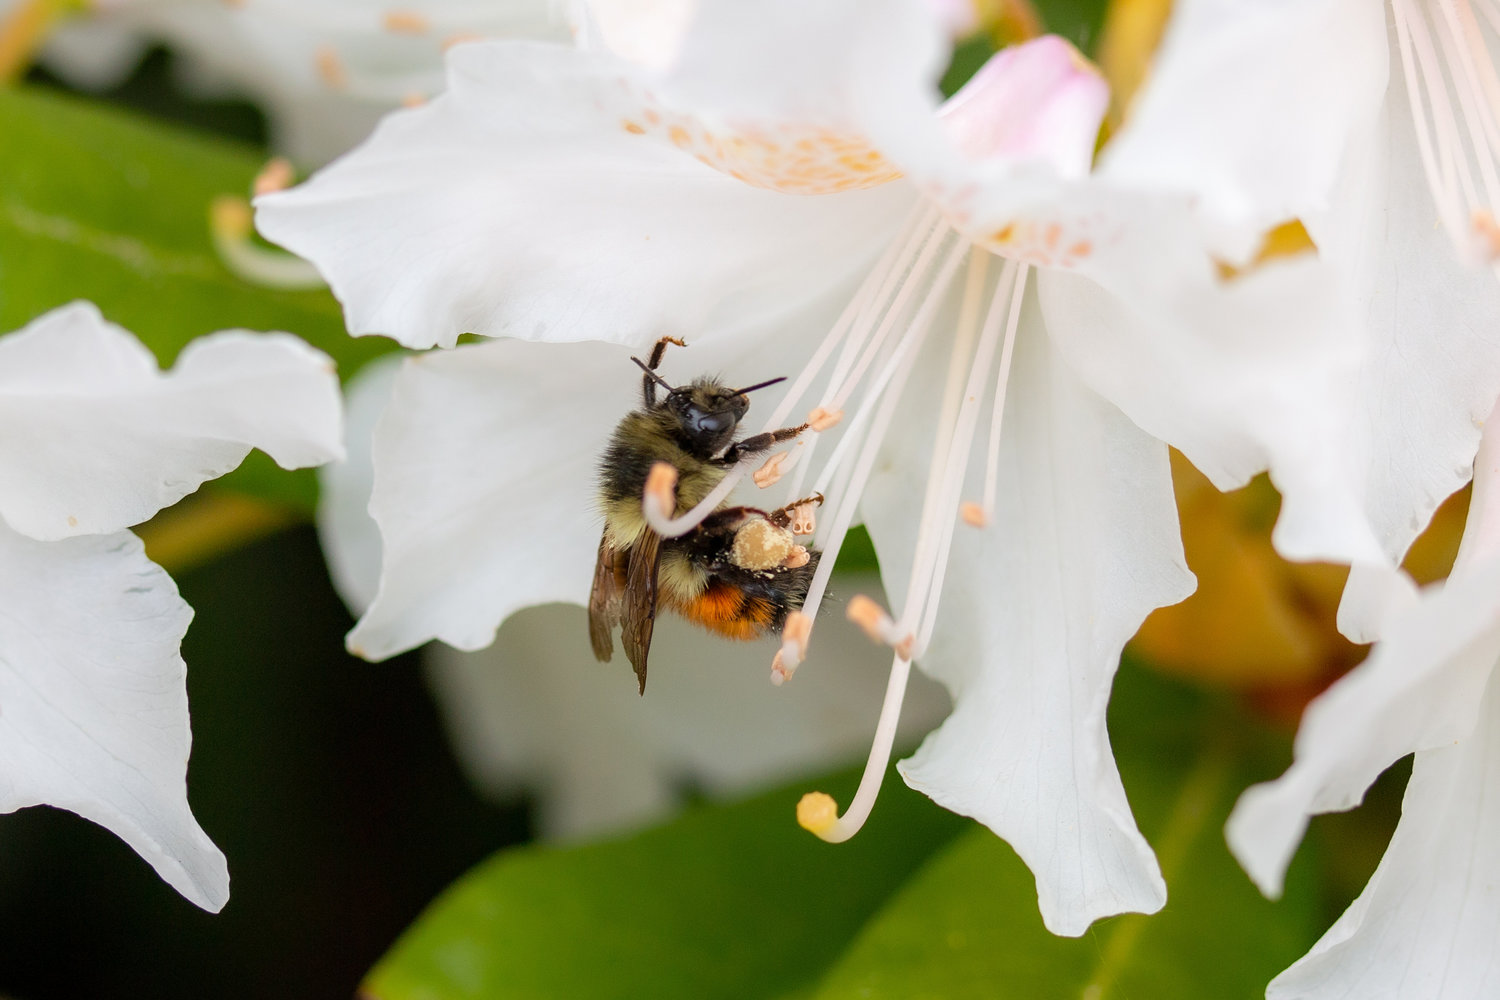 A bumblebee, with saddlebags full of pollen, lands on the stamen of a white rhododendron flower in this file photo.